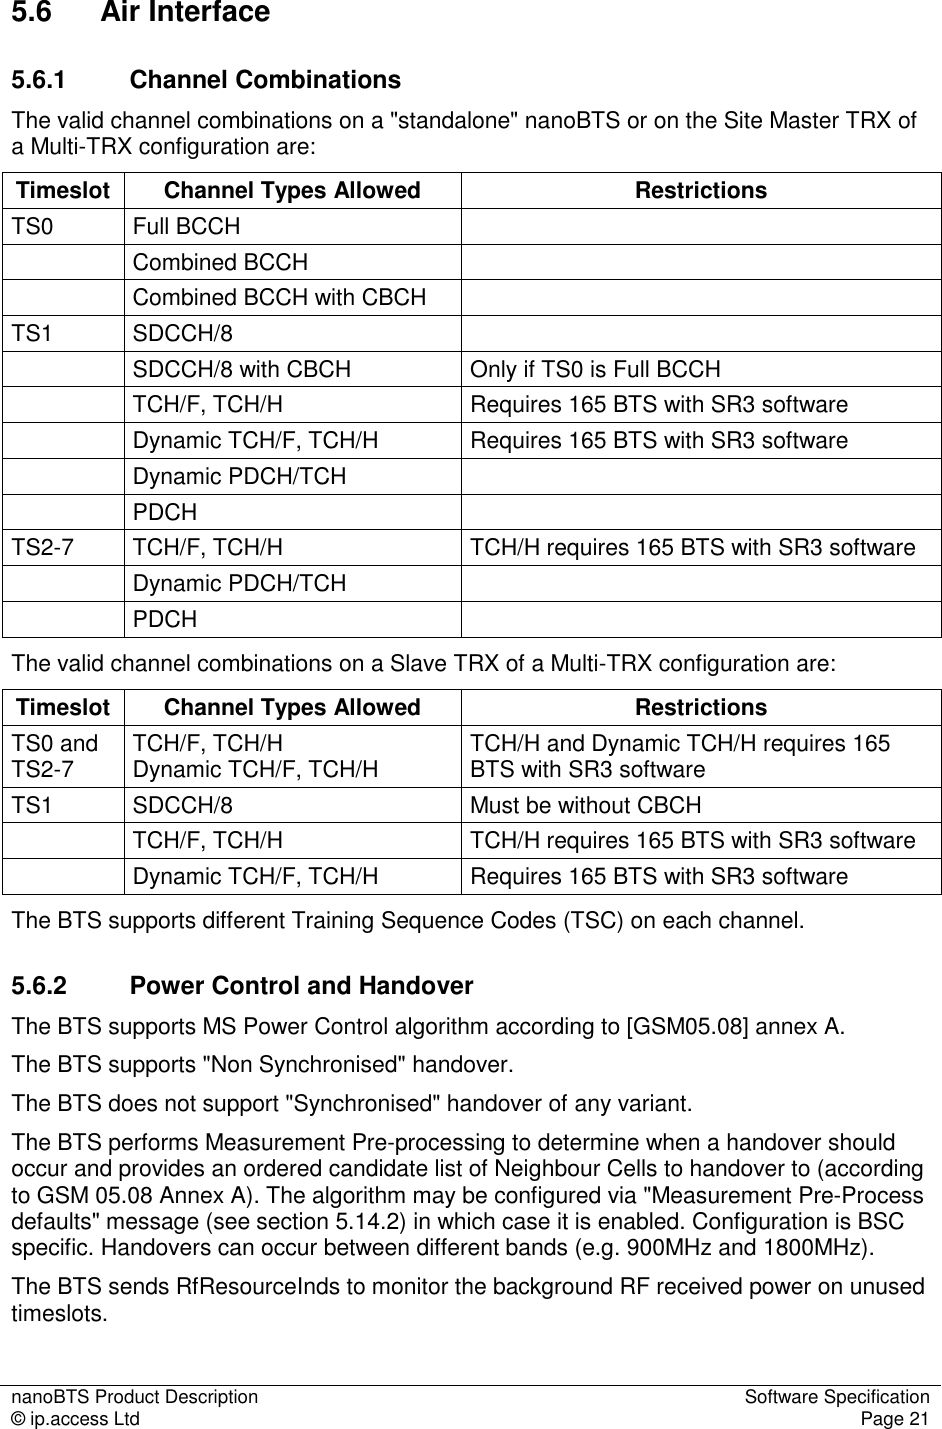 nanoBTS Product Description  Software Specification © ip.access Ltd  Page 21  5.6  Air Interface 5.6.1  Channel Combinations The valid channel combinations on a &quot;standalone&quot; nanoBTS or on the Site Master TRX of a Multi-TRX configuration are: Timeslot  Channel Types Allowed  Restrictions TS0  Full BCCH     Combined BCCH     Combined BCCH with CBCH   TS1  SDCCH/8     SDCCH/8 with CBCH  Only if TS0 is Full BCCH   TCH/F, TCH/H  Requires 165 BTS with SR3 software   Dynamic TCH/F, TCH/H  Requires 165 BTS with SR3 software   Dynamic PDCH/TCH       PDCH    TS2-7  TCH/F, TCH/H  TCH/H requires 165 BTS with SR3 software   Dynamic PDCH/TCH     PDCH    The valid channel combinations on a Slave TRX of a Multi-TRX configuration are: Timeslot  Channel Types Allowed  Restrictions TS0 and TS2-7  TCH/F, TCH/H  Dynamic TCH/F, TCH/H  TCH/H and Dynamic TCH/H requires 165 BTS with SR3 software TS1  SDCCH/8  Must be without CBCH   TCH/F, TCH/H  TCH/H requires 165 BTS with SR3 software   Dynamic TCH/F, TCH/H  Requires 165 BTS with SR3 software The BTS supports different Training Sequence Codes (TSC) on each channel. 5.6.2  Power Control and Handover The BTS supports MS Power Control algorithm according to [GSM05.08] annex A. The BTS supports &quot;Non Synchronised&quot; handover. The BTS does not support &quot;Synchronised&quot; handover of any variant. The BTS performs Measurement Pre-processing to determine when a handover should occur and provides an ordered candidate list of Neighbour Cells to handover to (according to GSM 05.08 Annex A). The algorithm may be configured via &quot;Measurement Pre-Process defaults&quot; message (see section 5.14.2) in which case it is enabled. Configuration is BSC specific. Handovers can occur between different bands (e.g. 900MHz and 1800MHz). The BTS sends RfResourceInds to monitor the background RF received power on unused timeslots. 